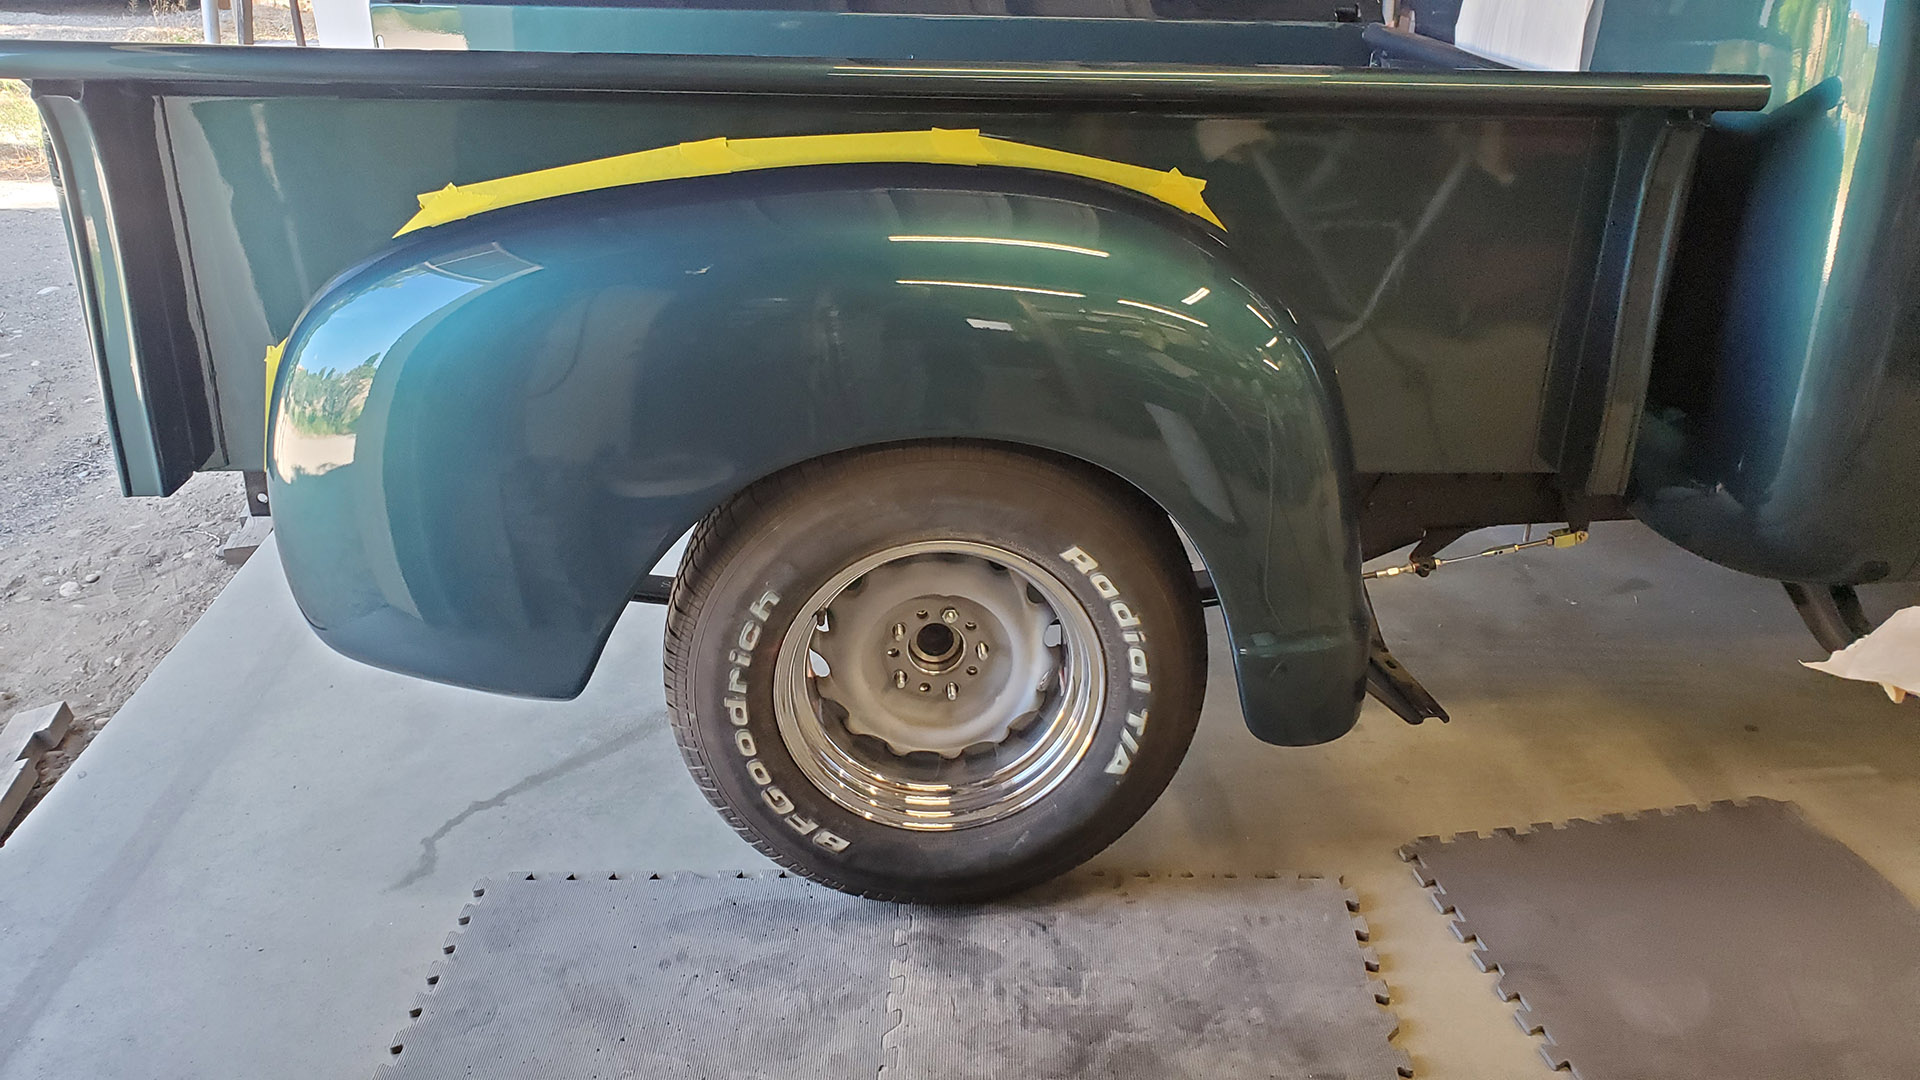 Wheel/tires should fit without rubbing the fenders or bed sides